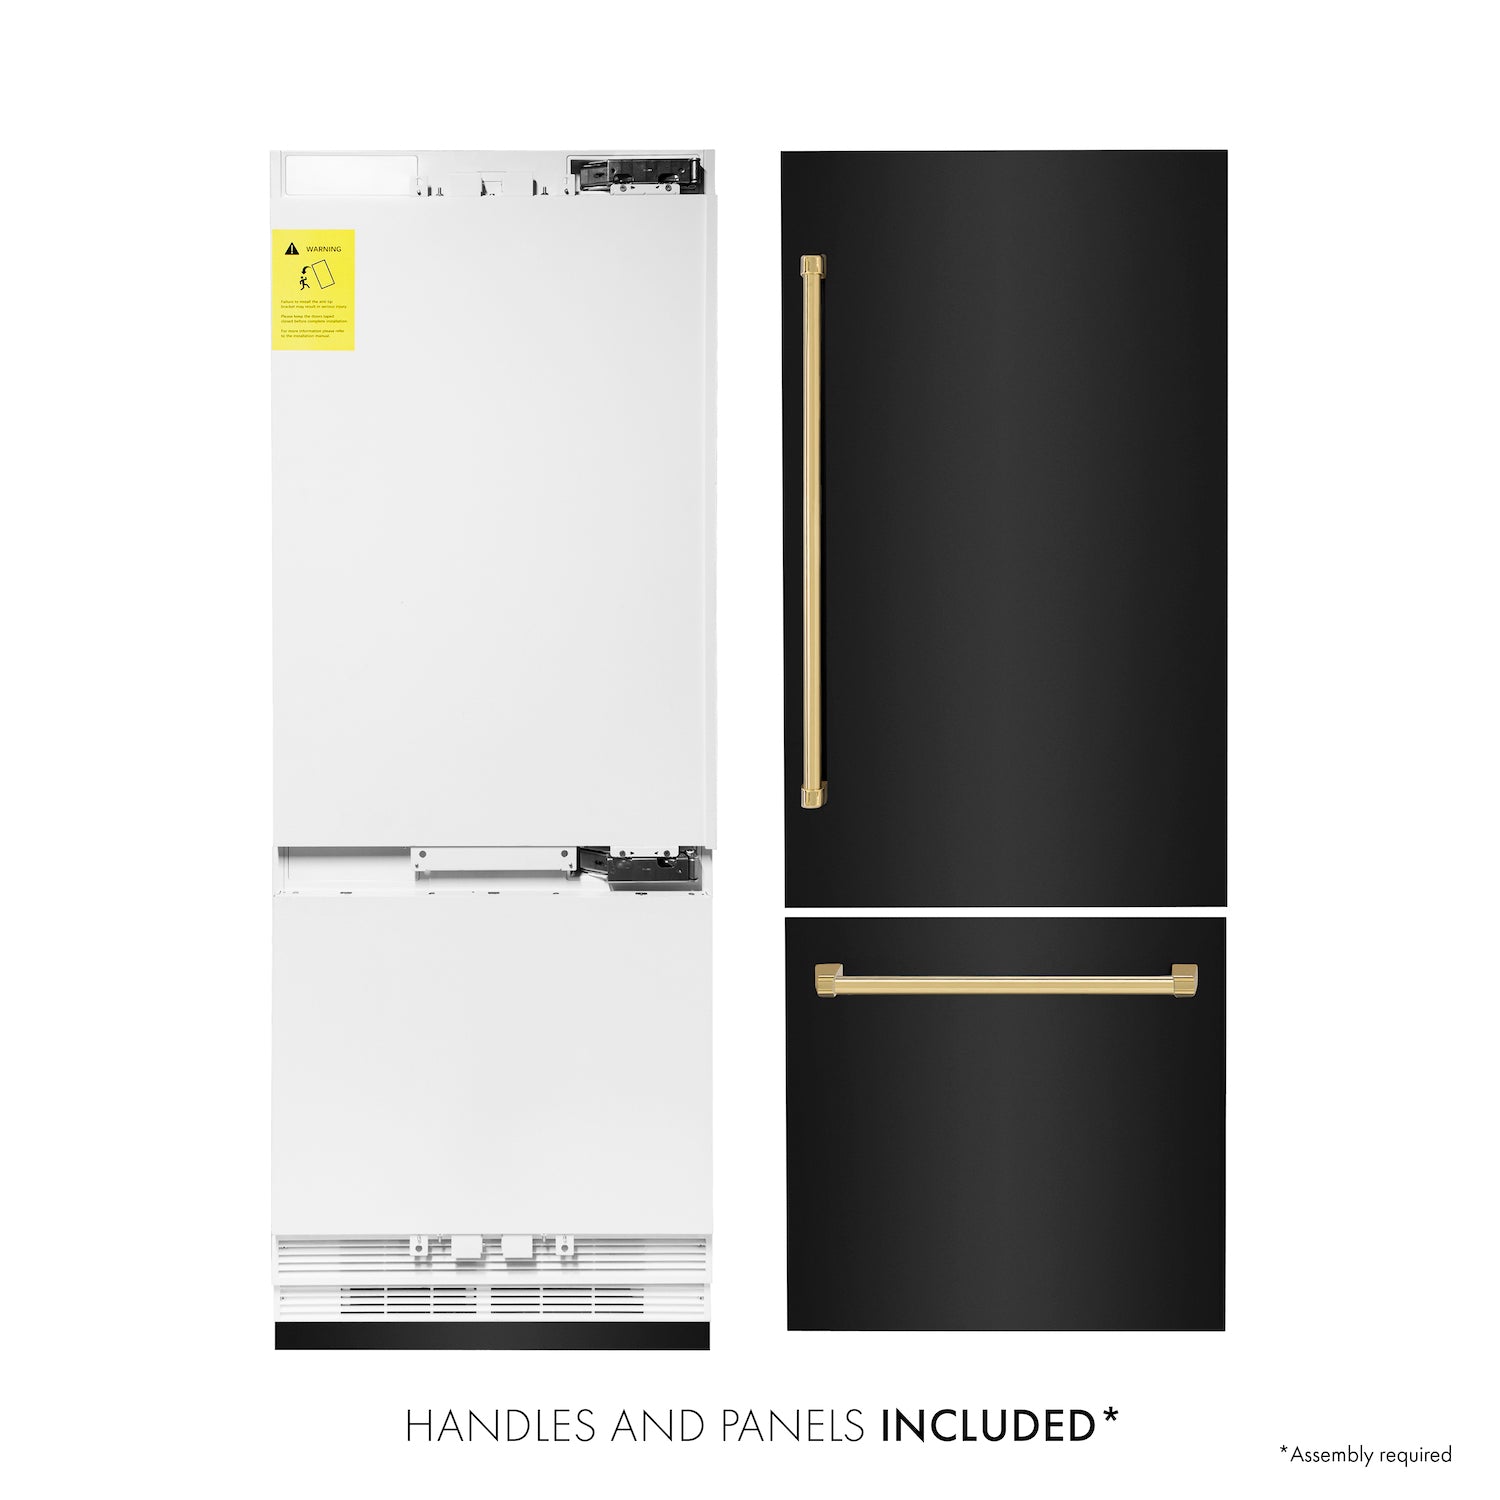 ZLINE 30" Built-in Refrigerator with Black Stainless Steel panels front.